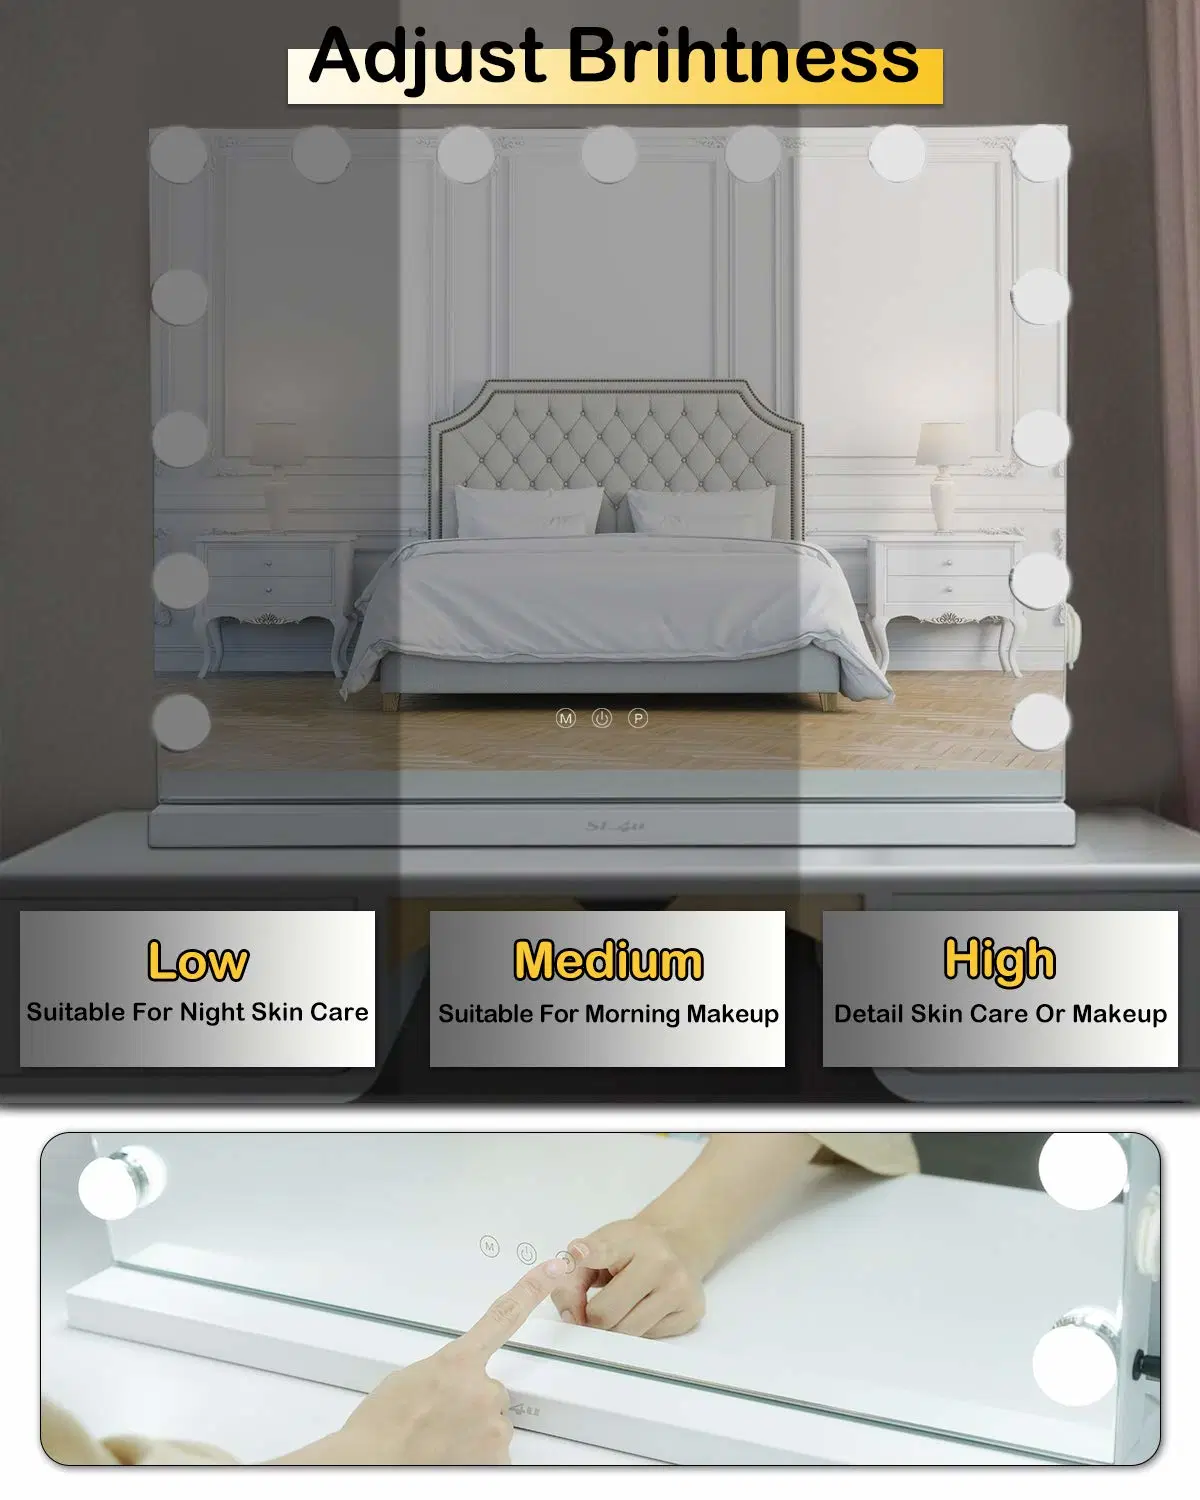 Bedroom Hollywood Wall Mounted LED Bulbs Makeup Mirror Dimmer Switch Light Dressing Room Vanity Tabletop Mirror